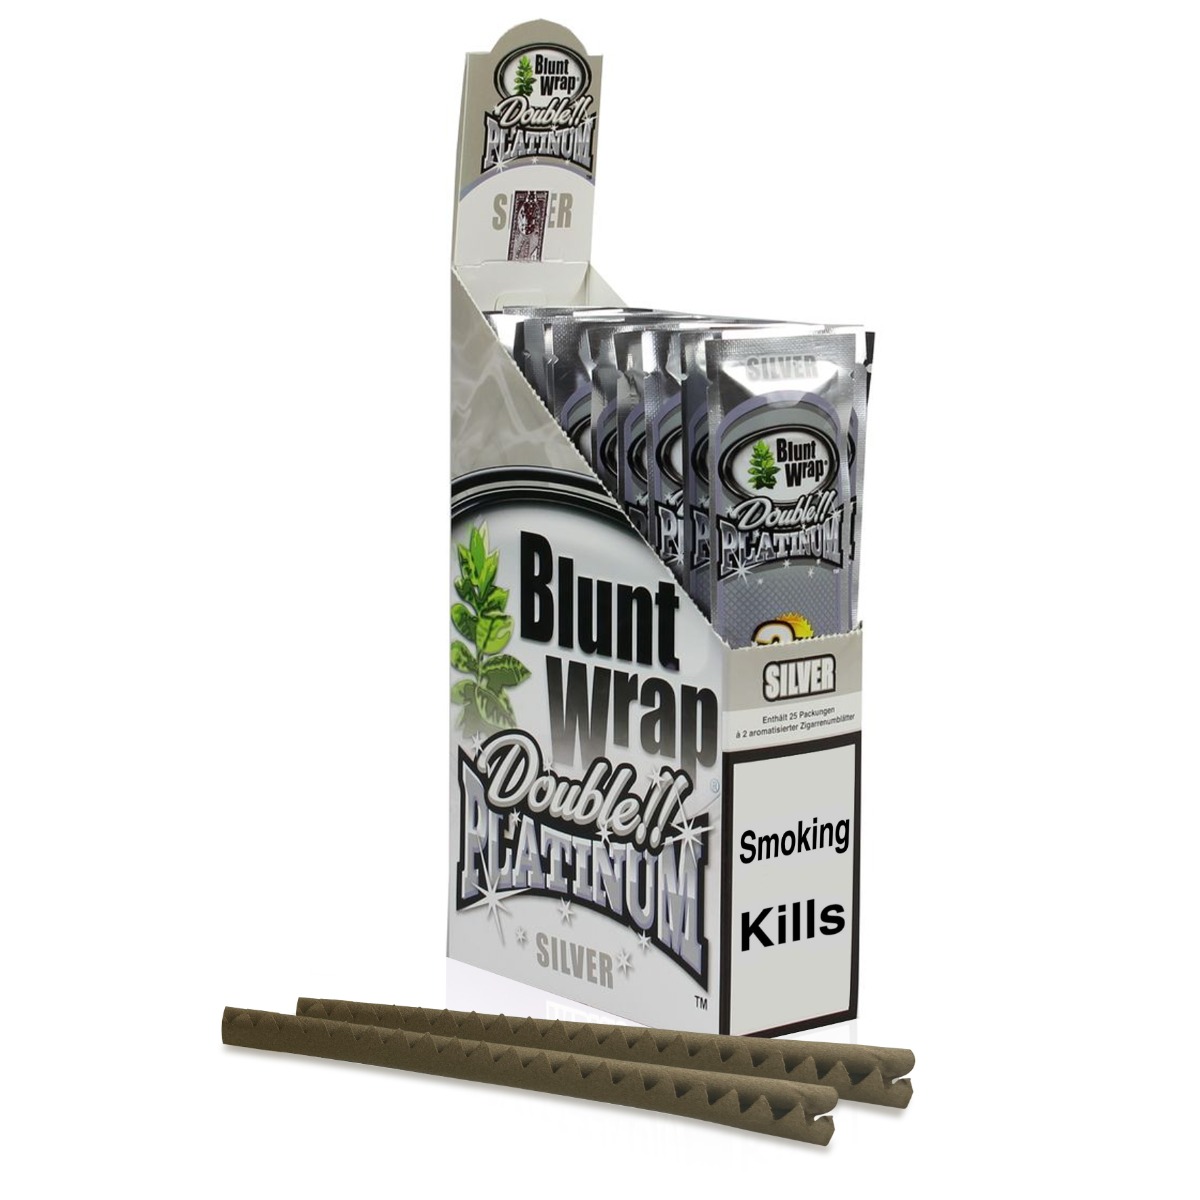 Blunt wrap double platinum - Silver (Previously Berries) - pack of 2